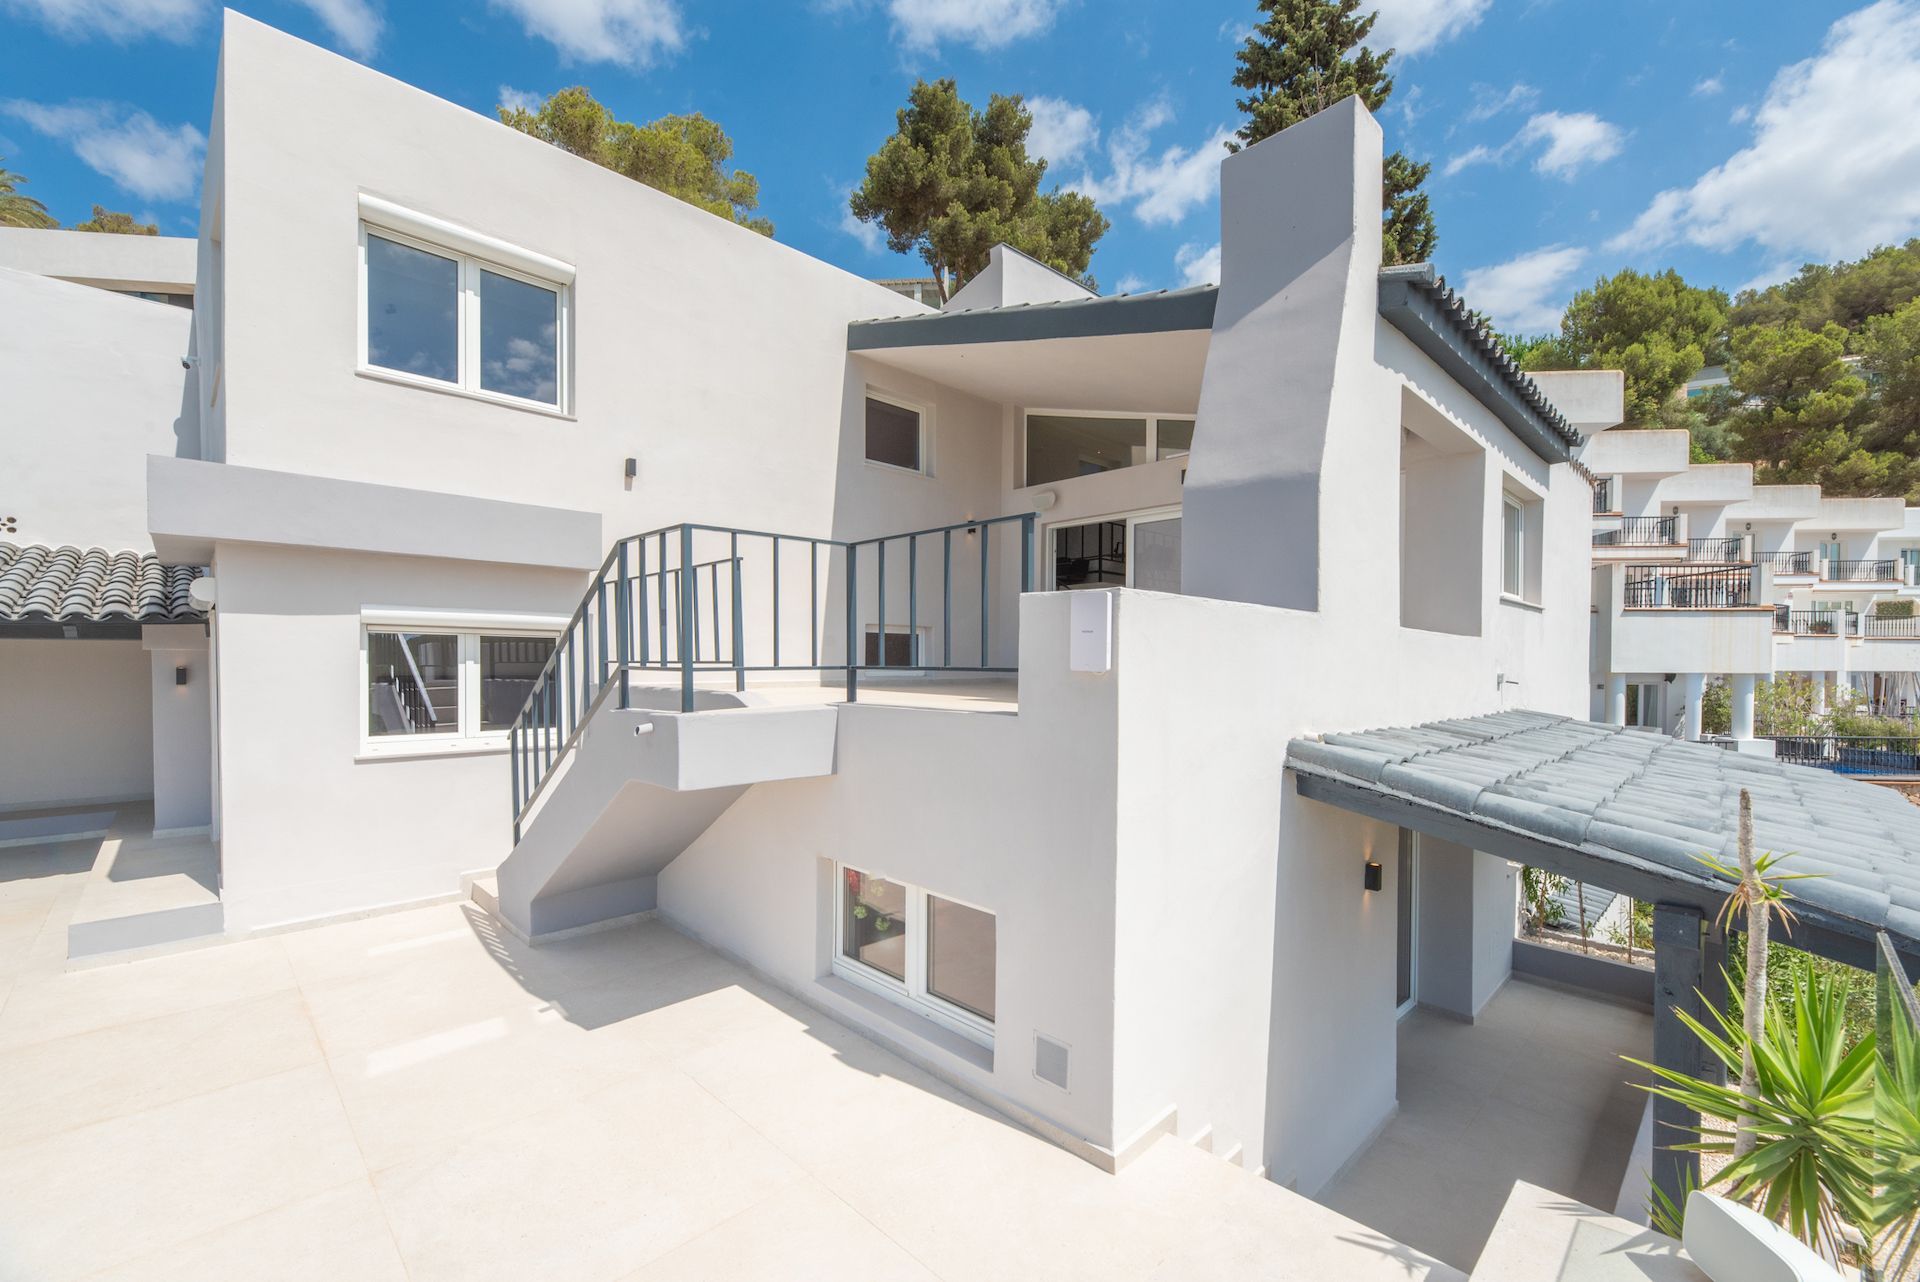 Brand new villa with fantastic views in Can Furnet